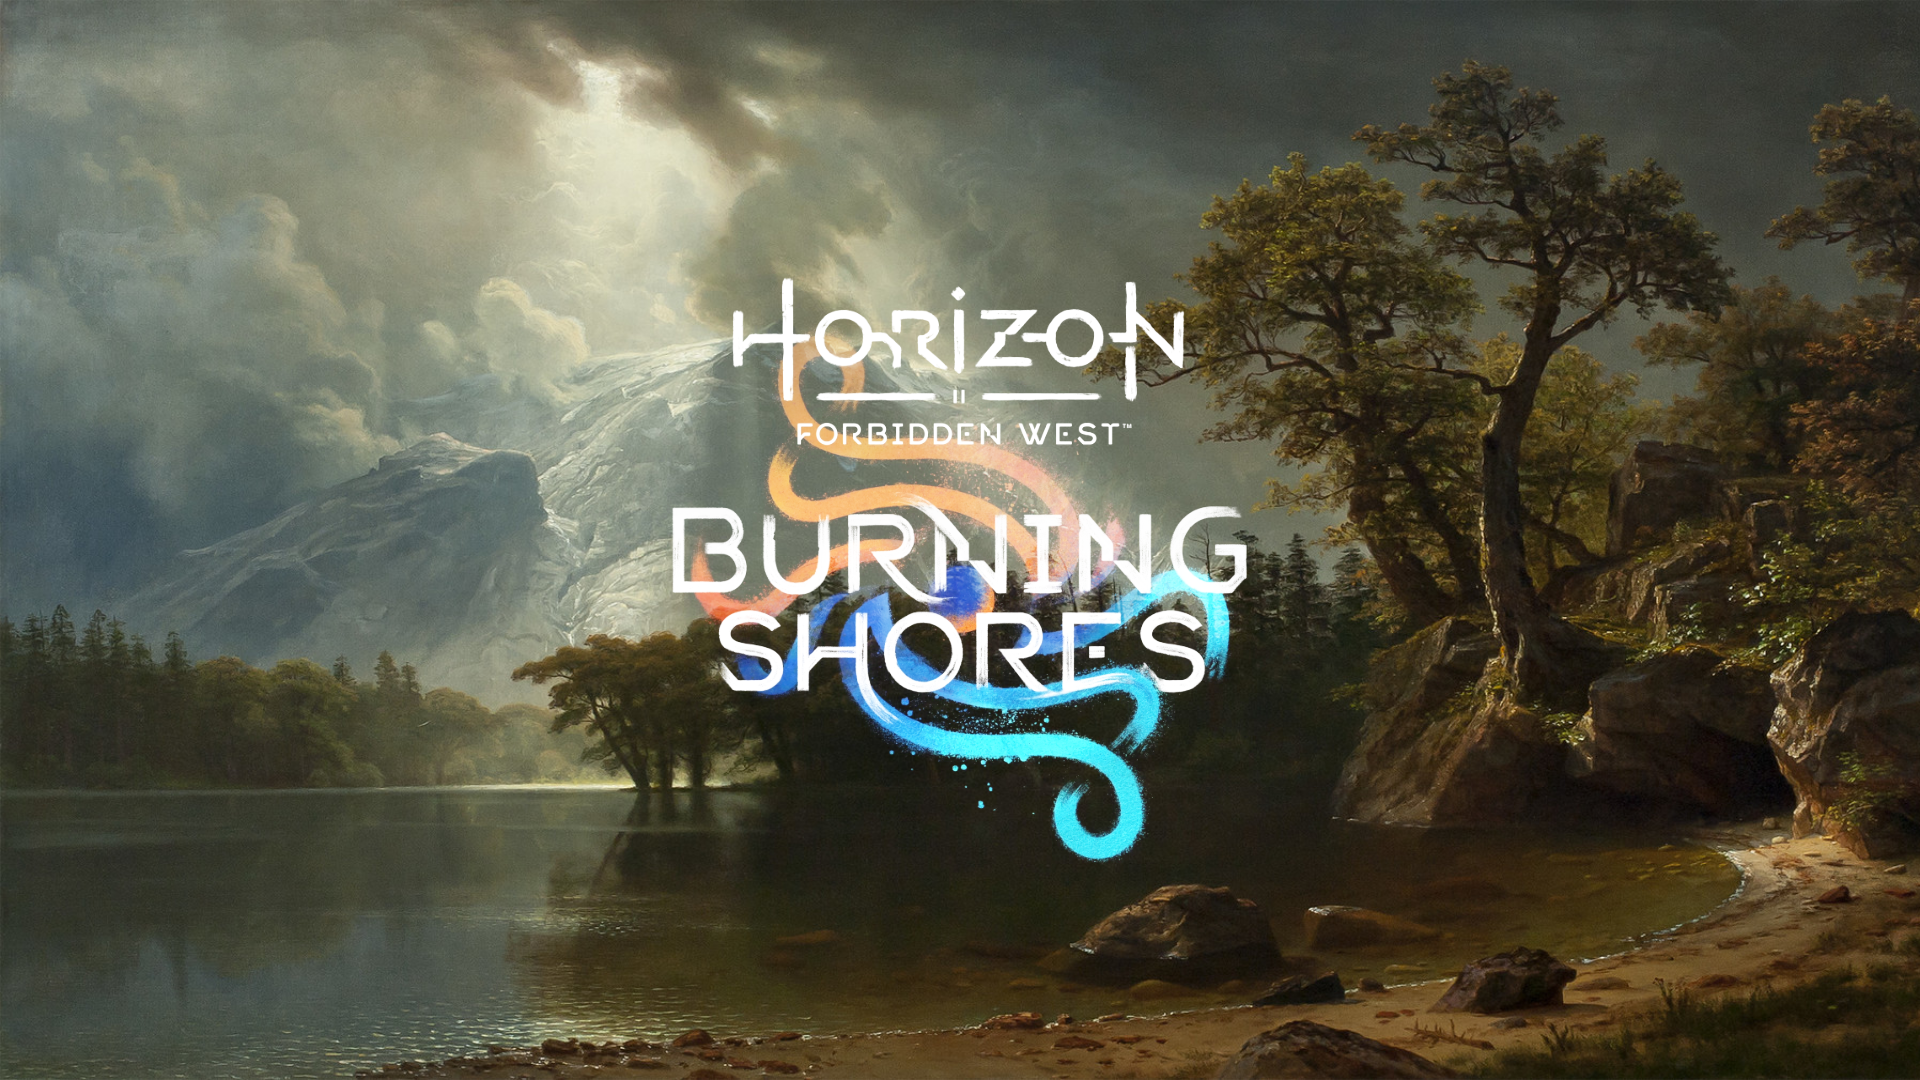 Horizon Forbidden West: Burning Shores is exclusive to PlayStation 5  because of its clouds